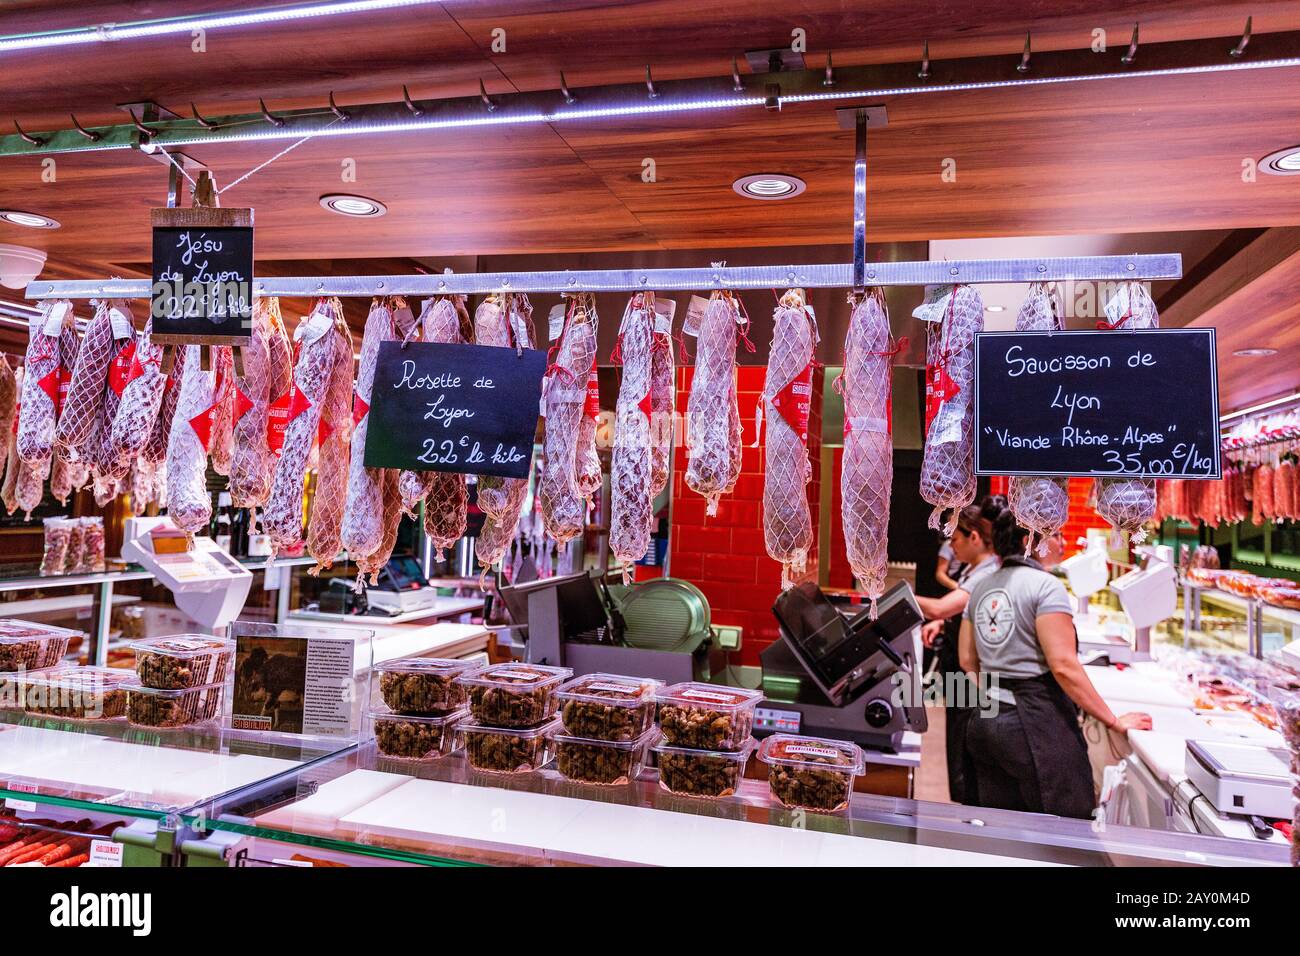 24 July 2019, Lyon, France: French saucisson sausages for sale at local market in Lyon Stock Photo